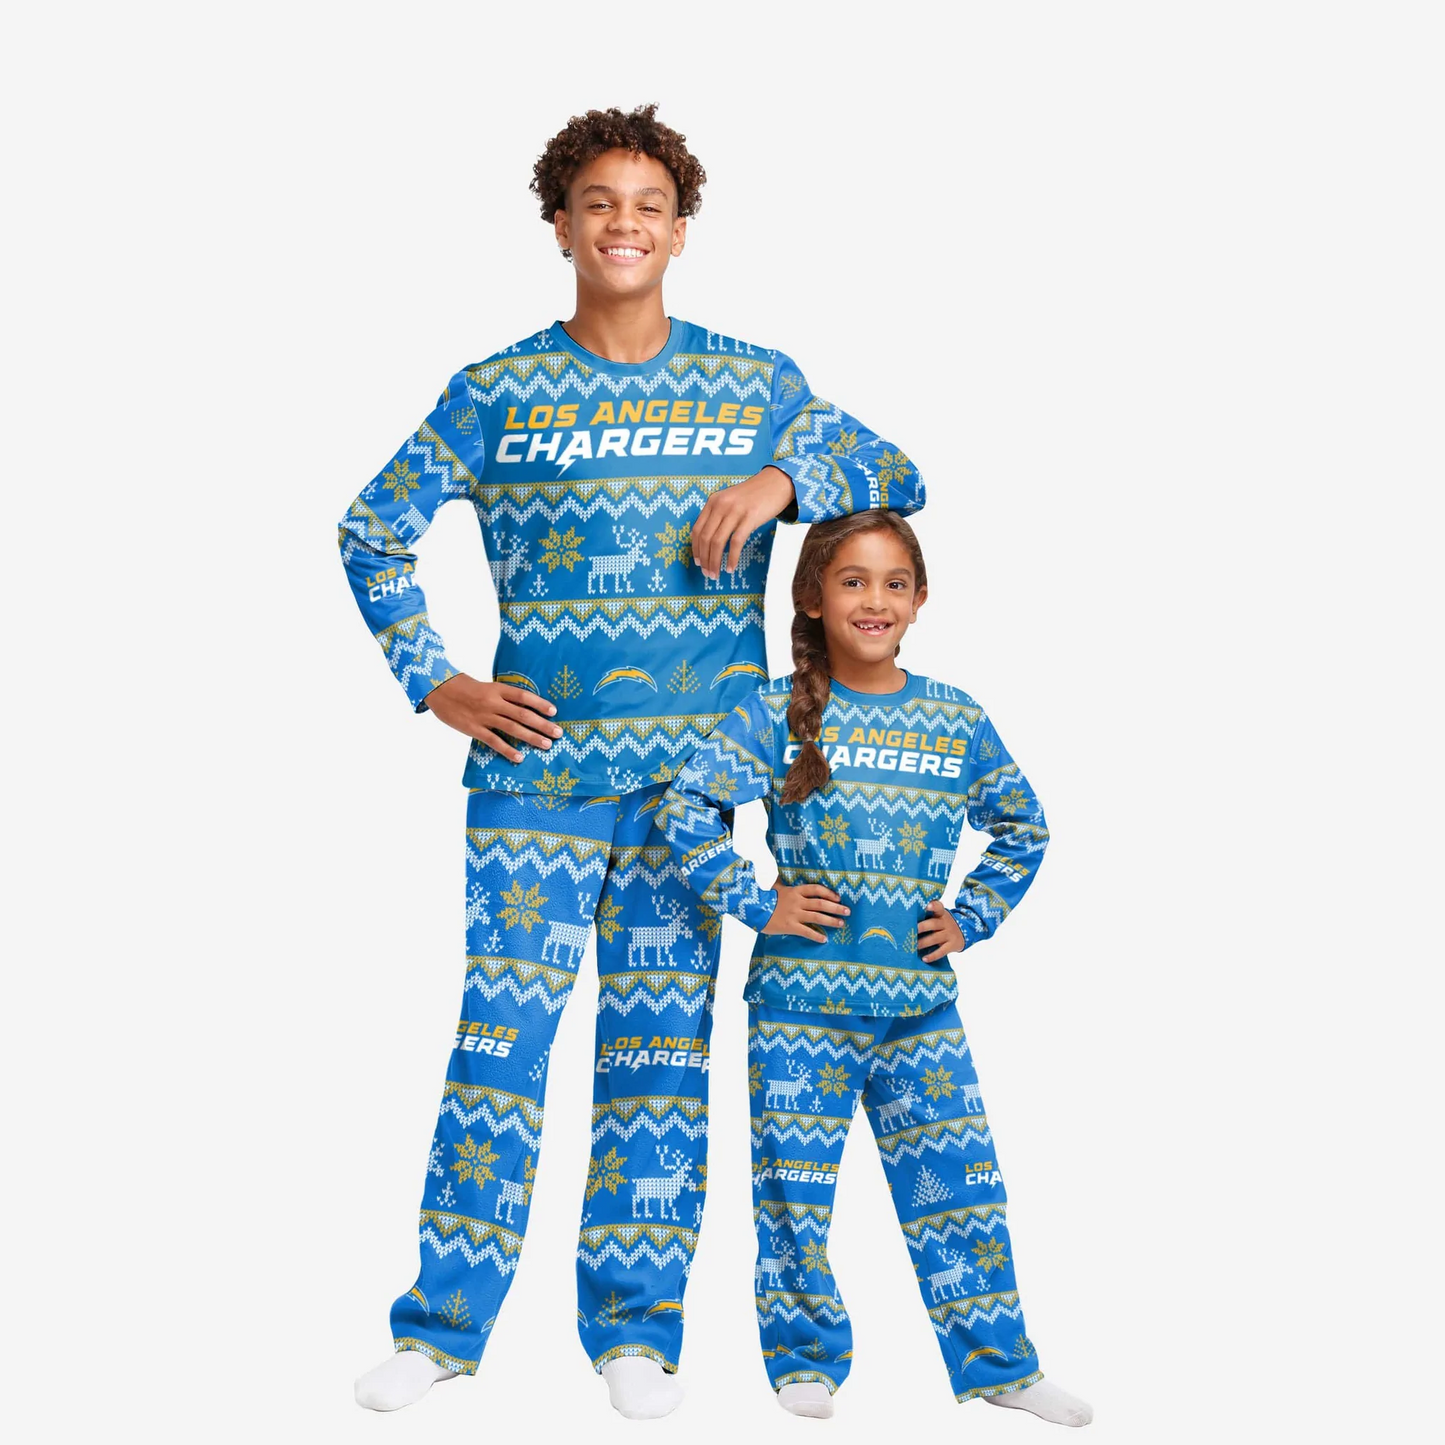 LOS ANGELES CHARGERS YOUTH ALL OVER PRINT PAJAMAS